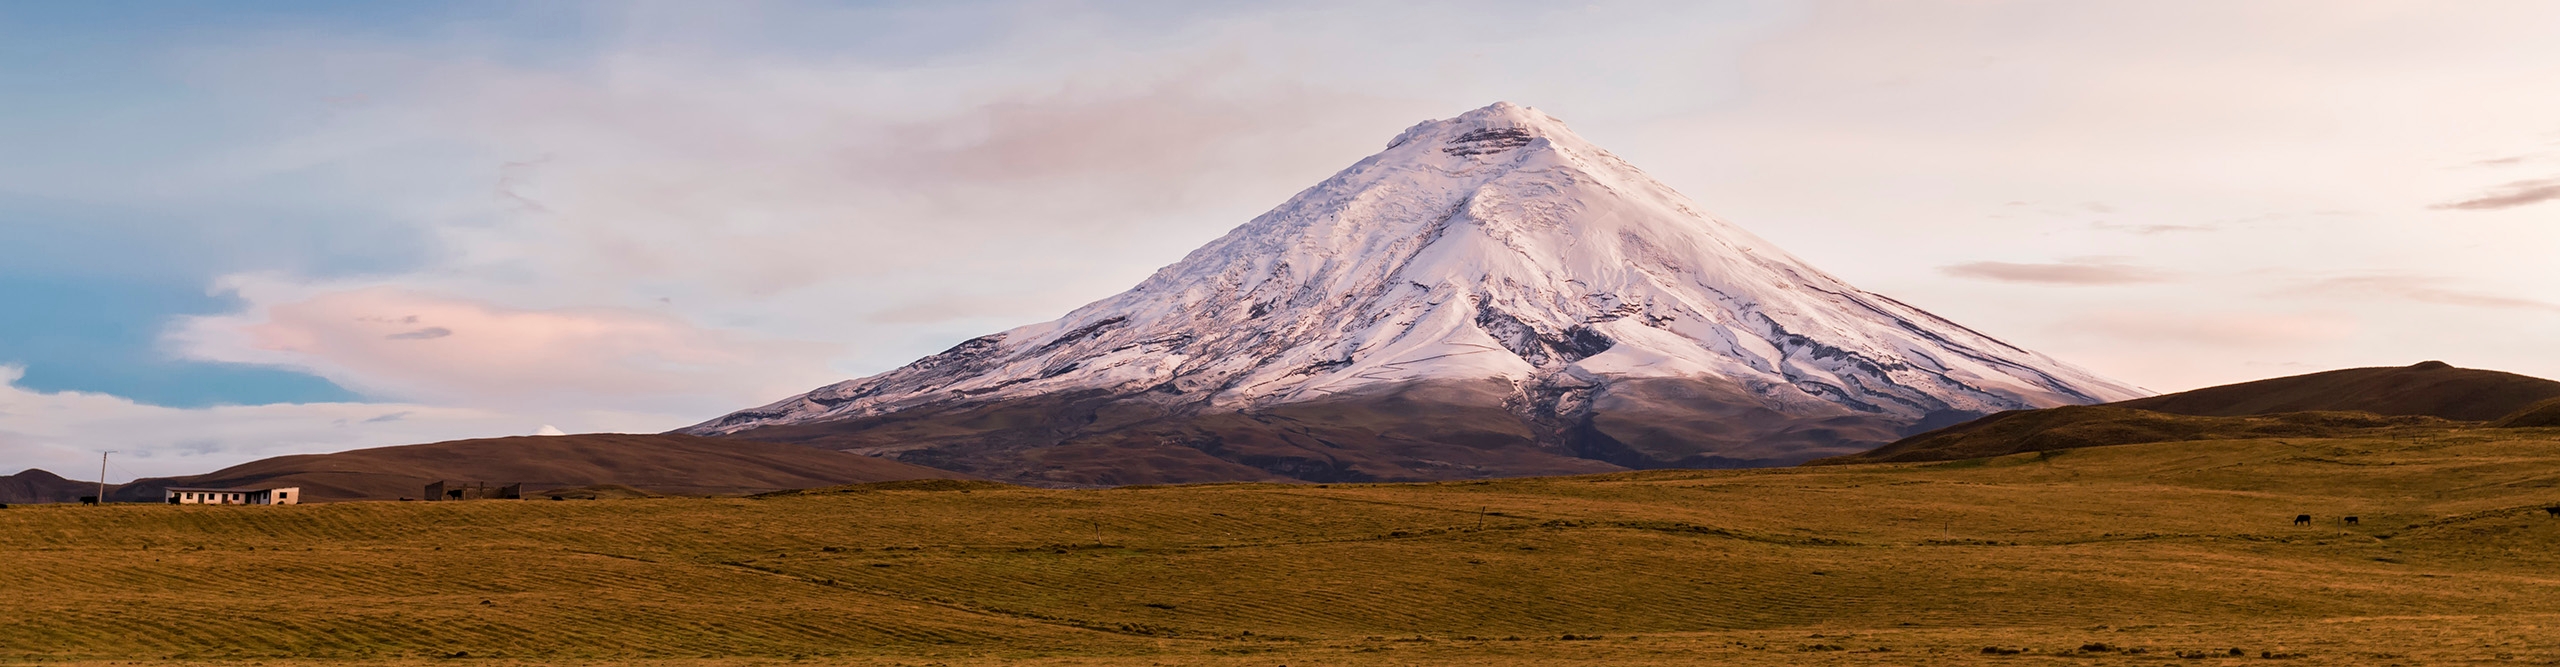 Cotopaxi Volcano at dusk, with snow on top, on a clear day, near the city of Quito, Ecuador 